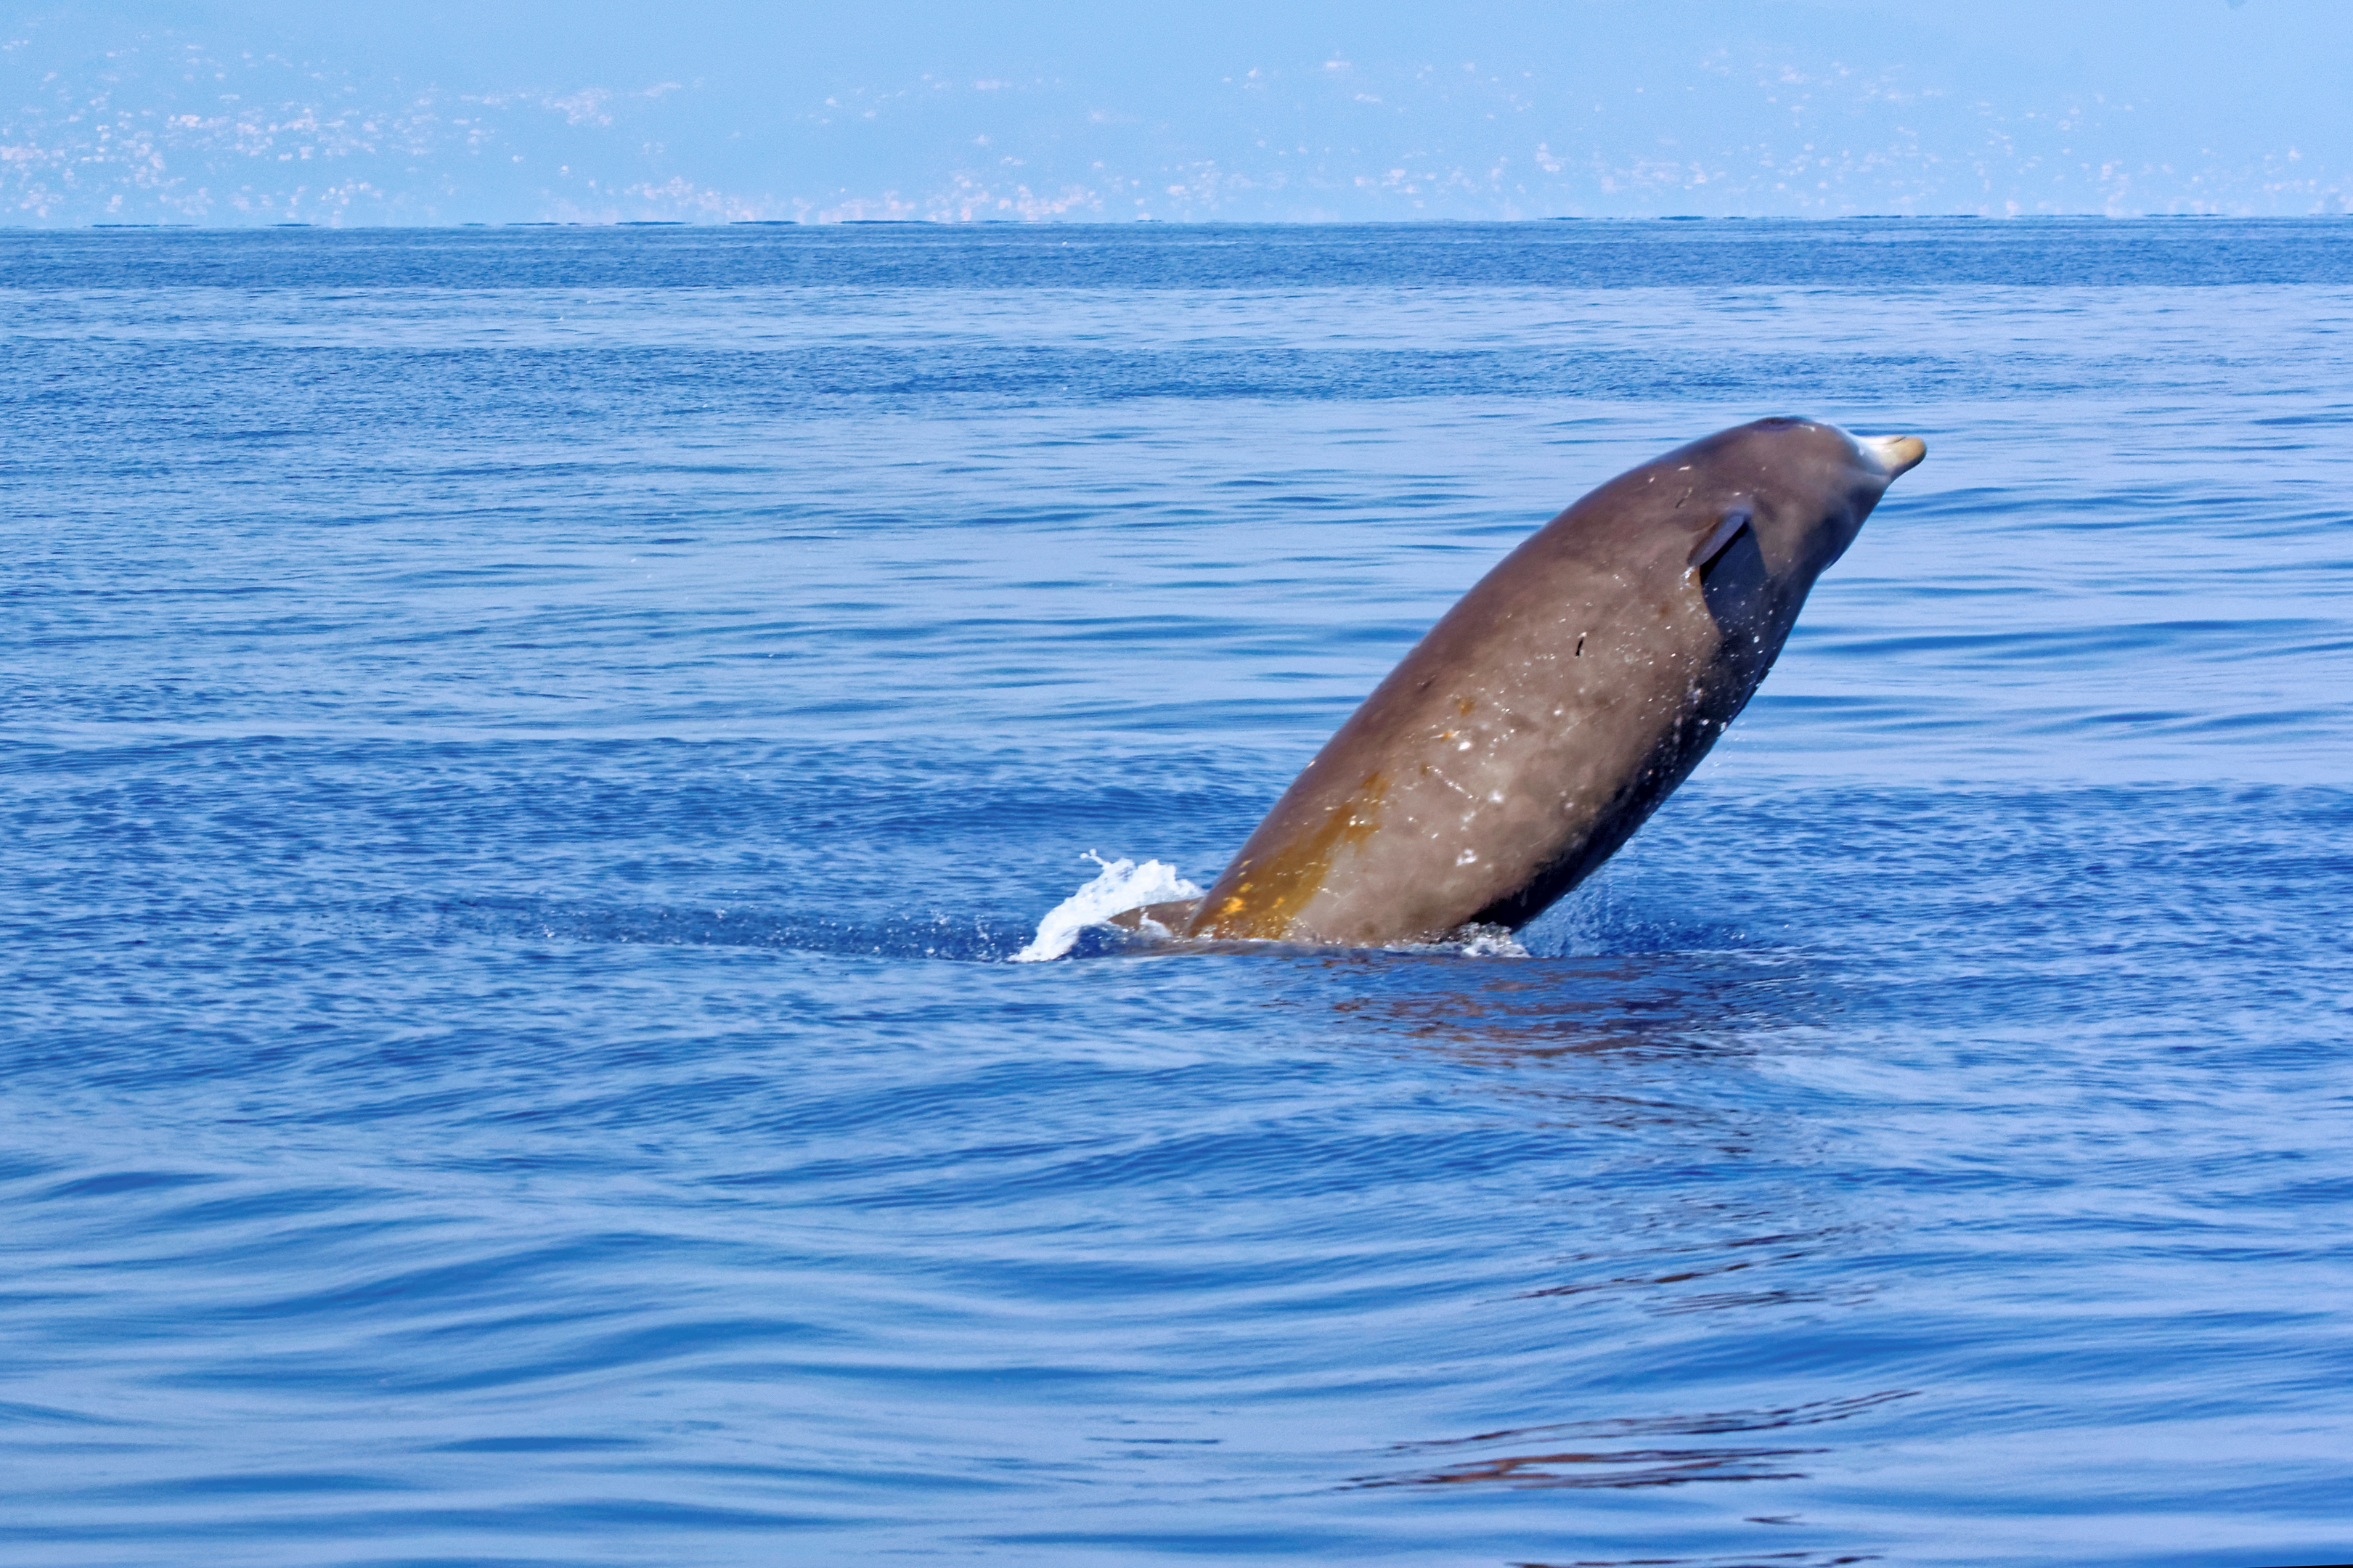 Cuvier's beaked whales are susceptible to military acoustic interference and deaths have been linked to this in the past. (Getty)